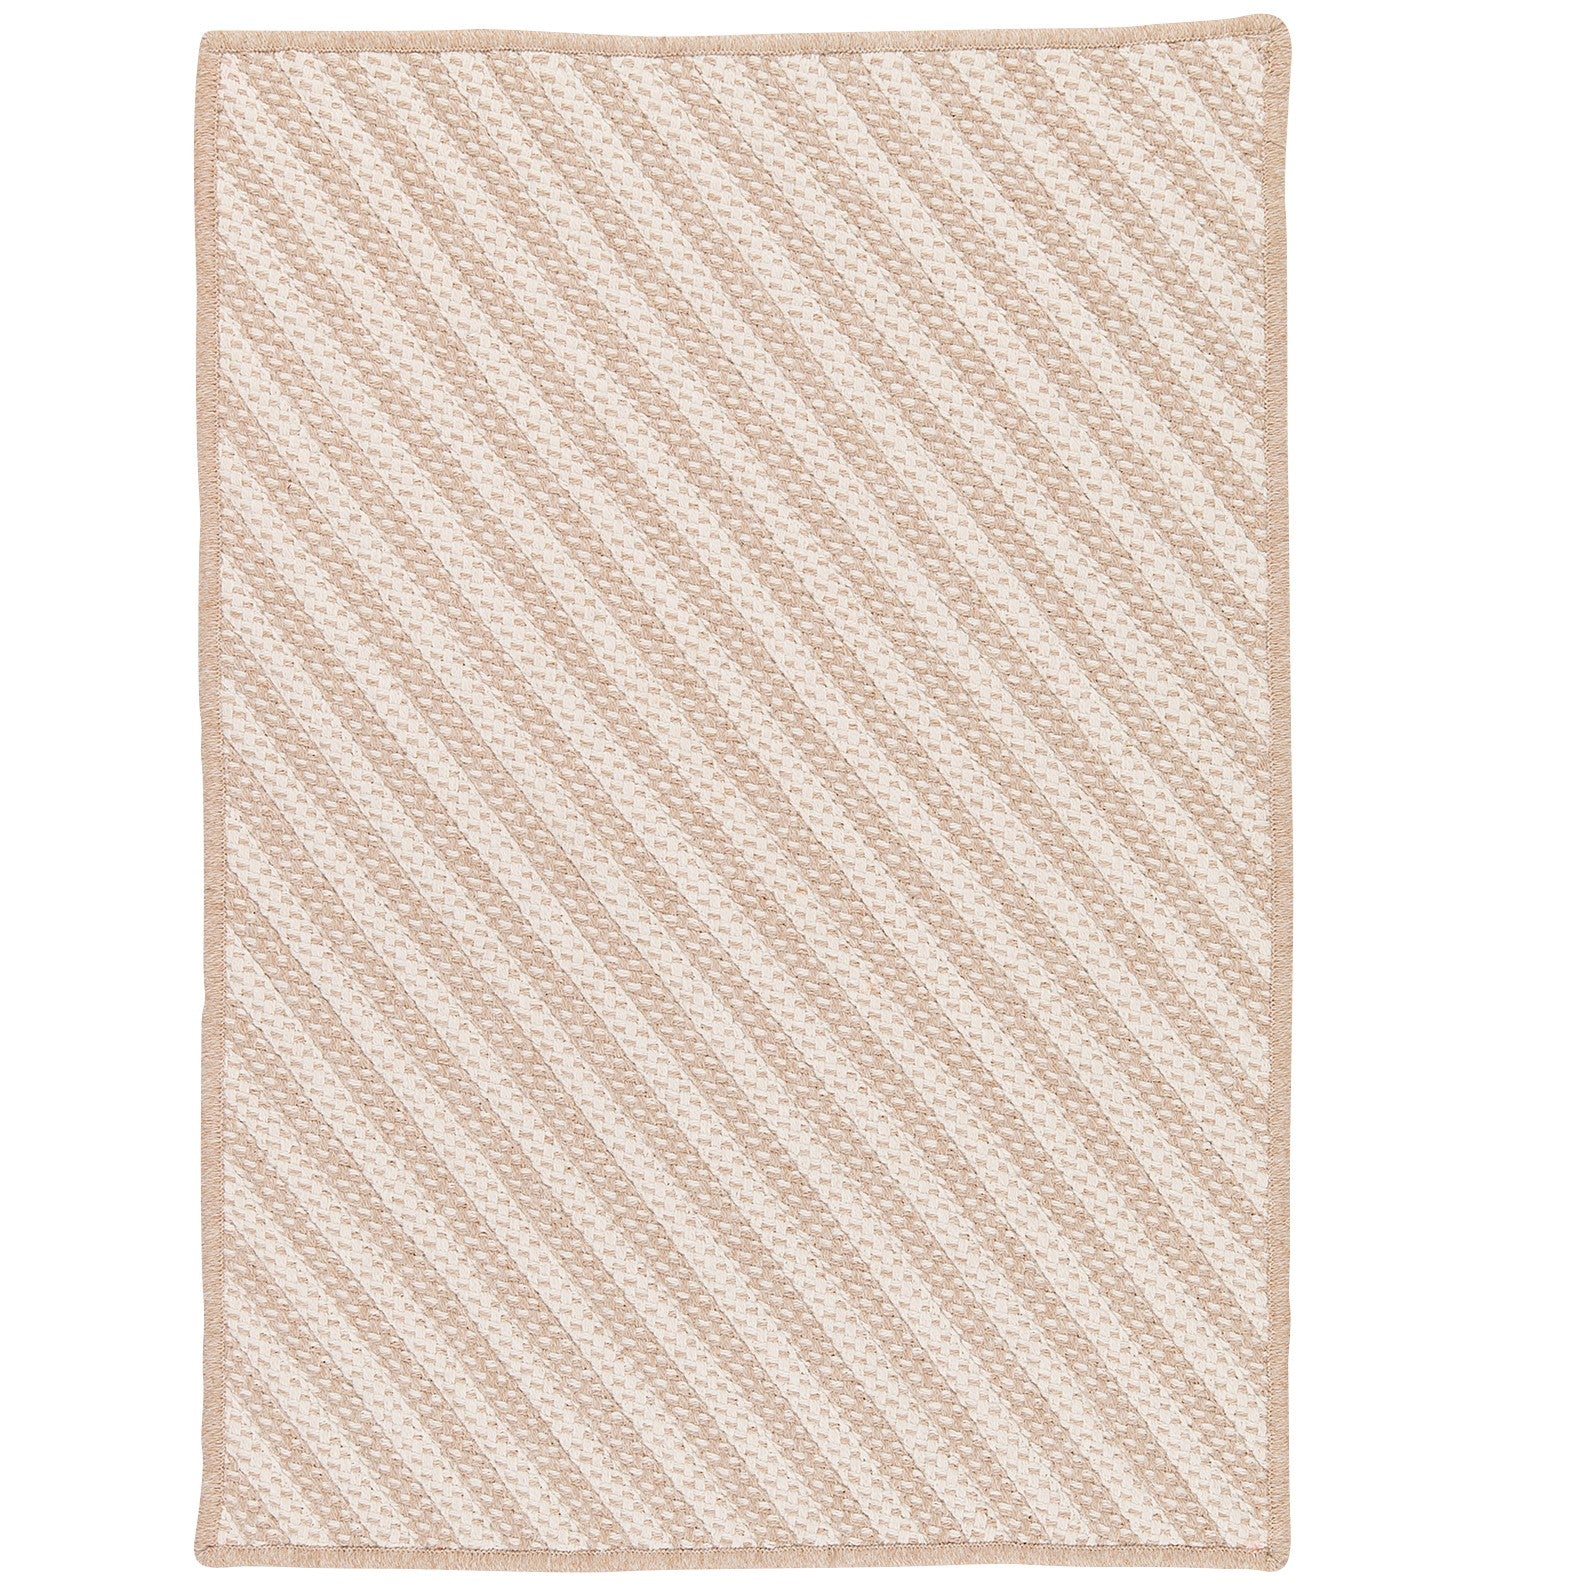 Colonial Mills Blue Hill BI81 Natural Contemporary Area Rug